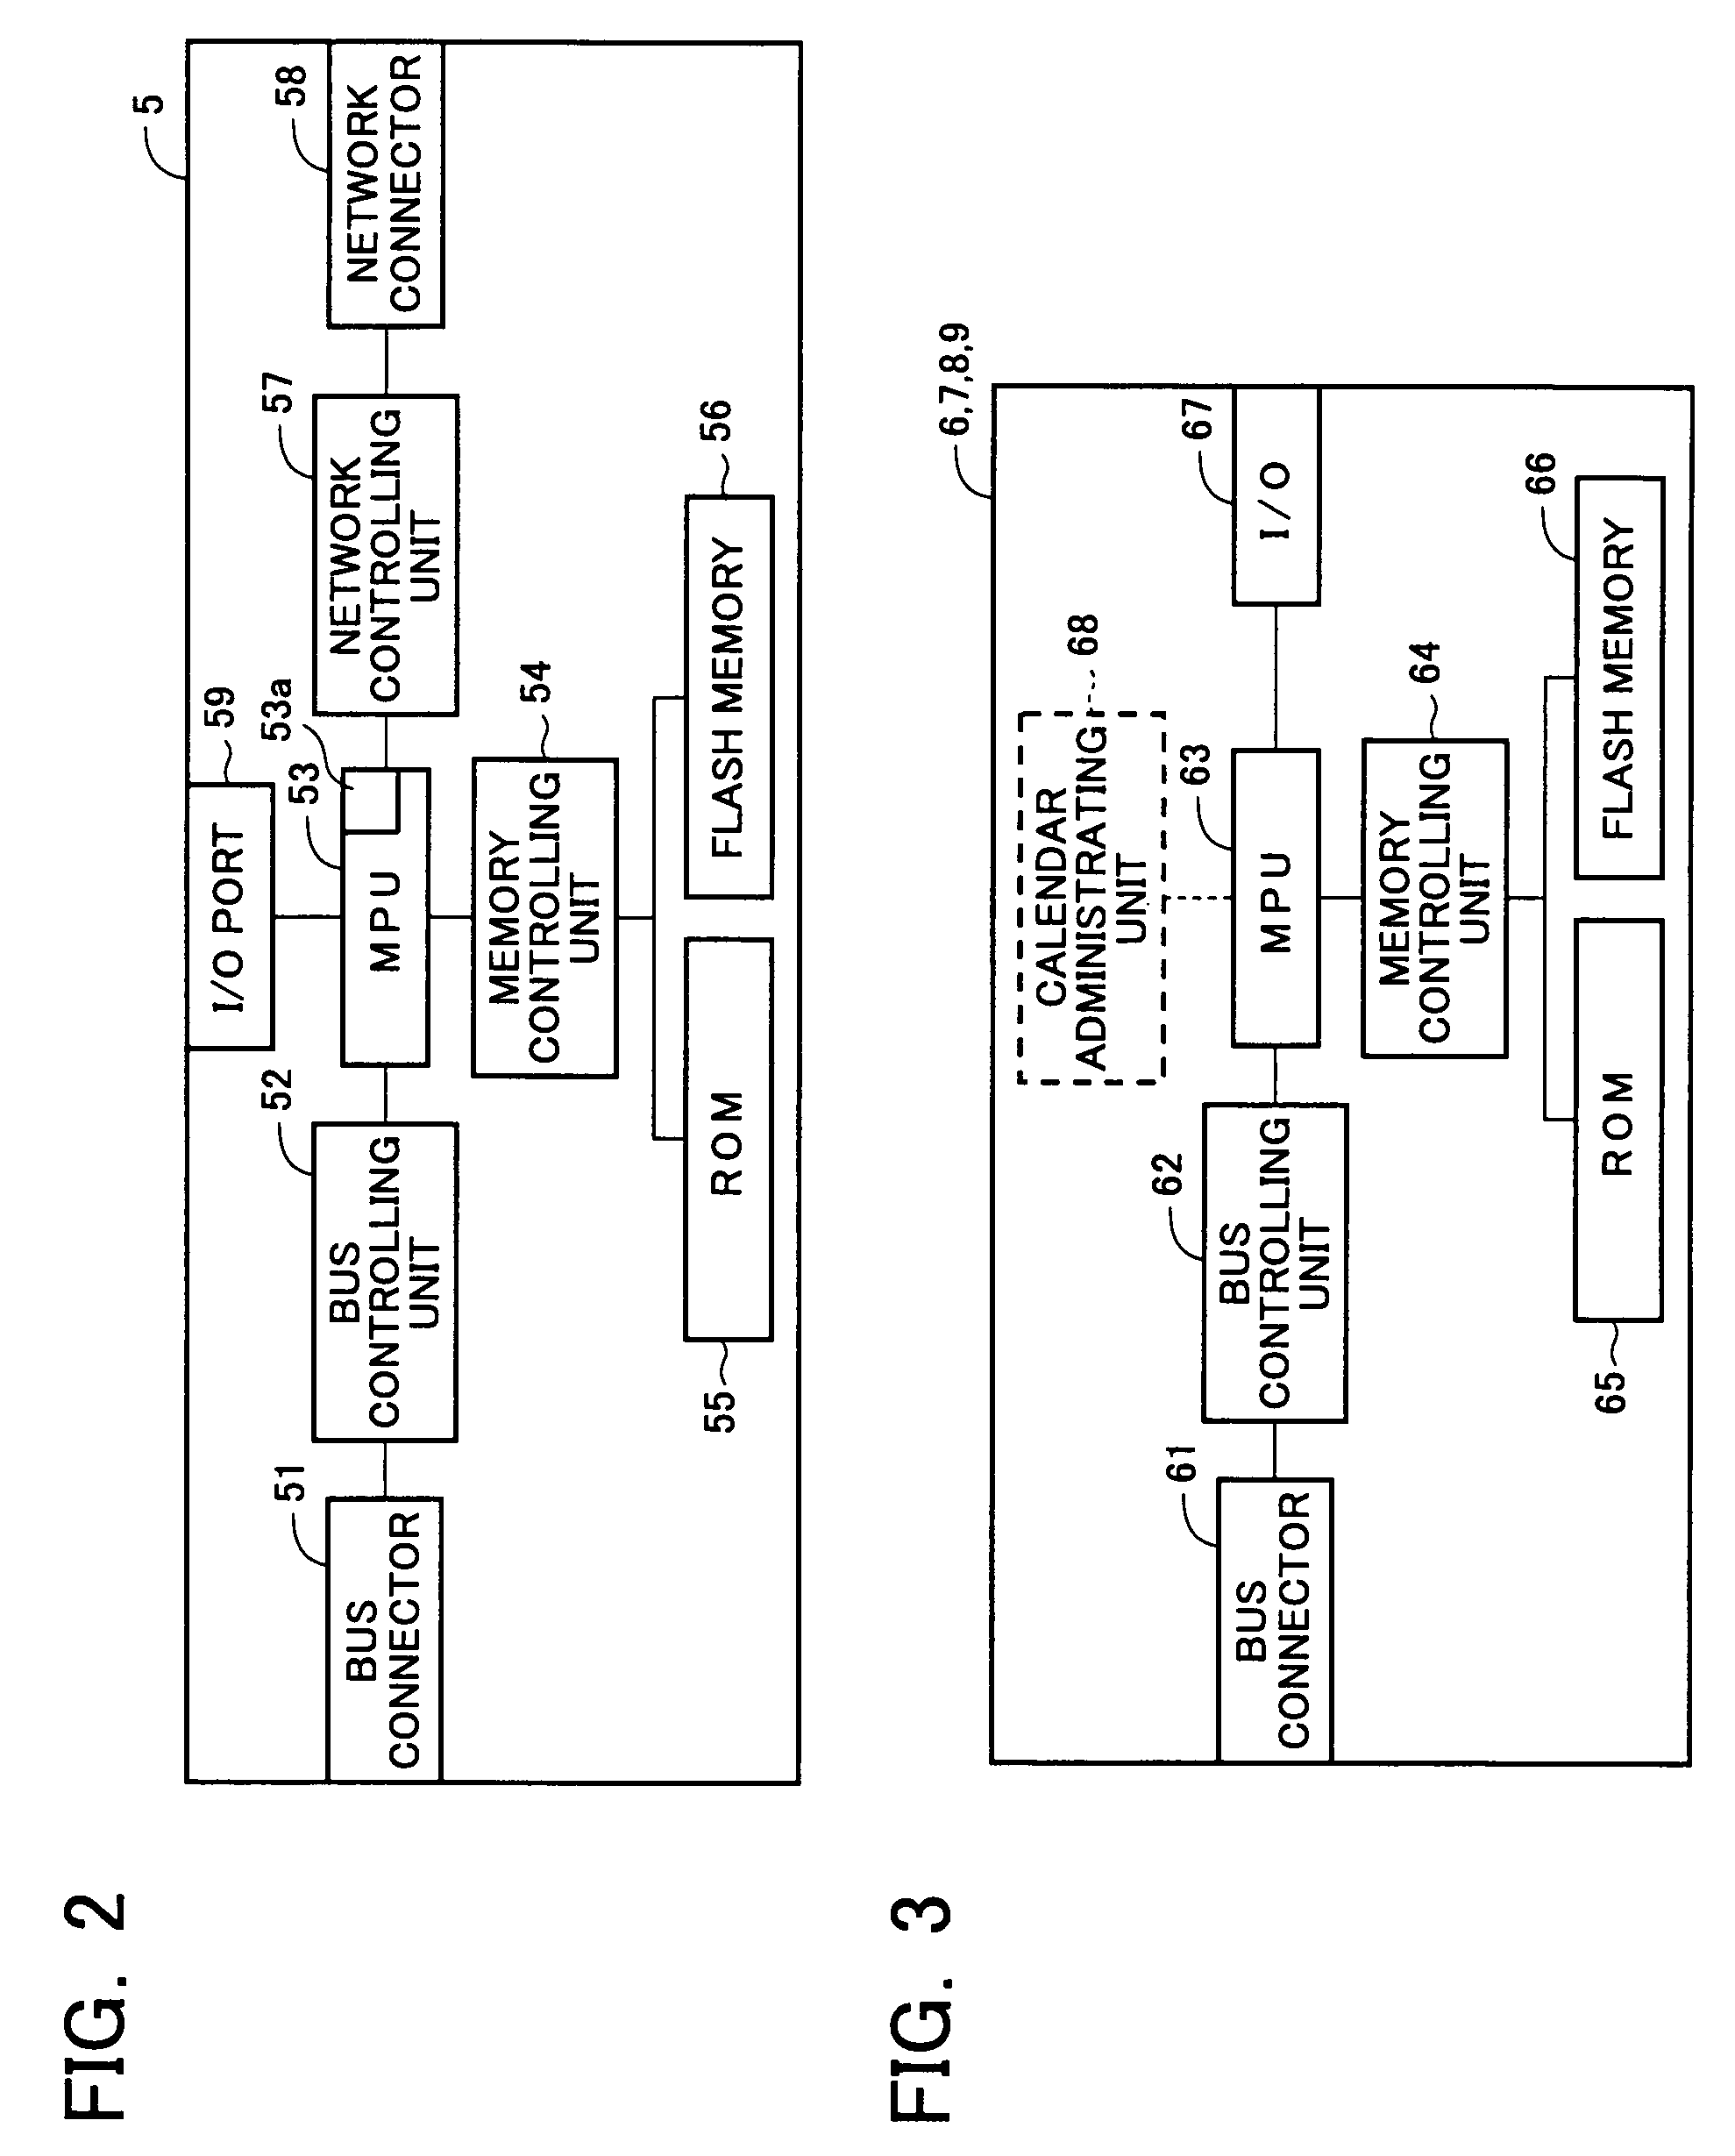 Image processing apparatus having an energization switching unit and control information updating unit